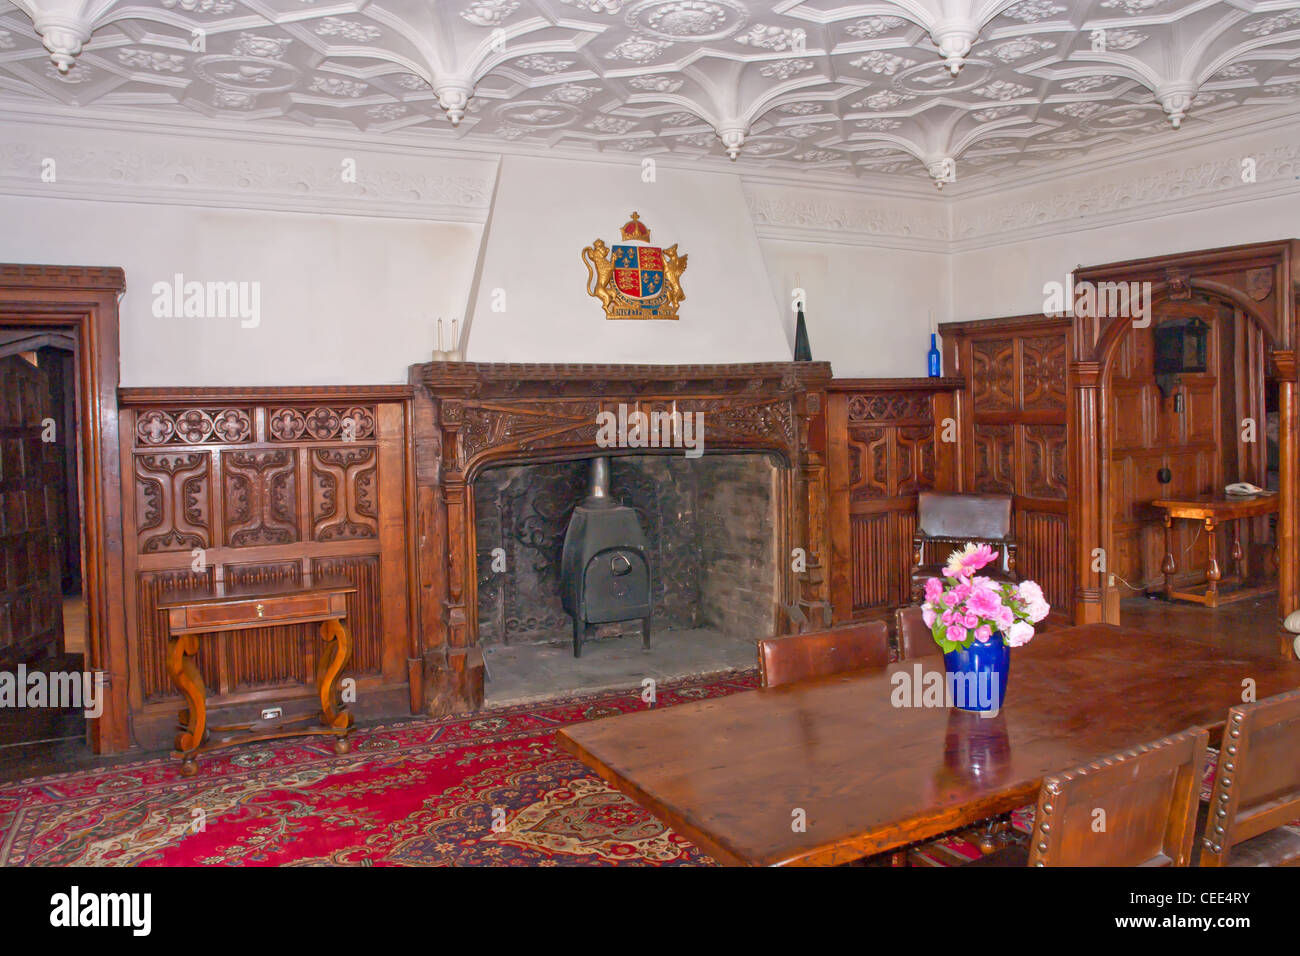 Interior of Castle Lodge, Ludlow, Shropshire. A medieval Tudor/Elizabethan building with a wealth of fine paneling. Stock Photo